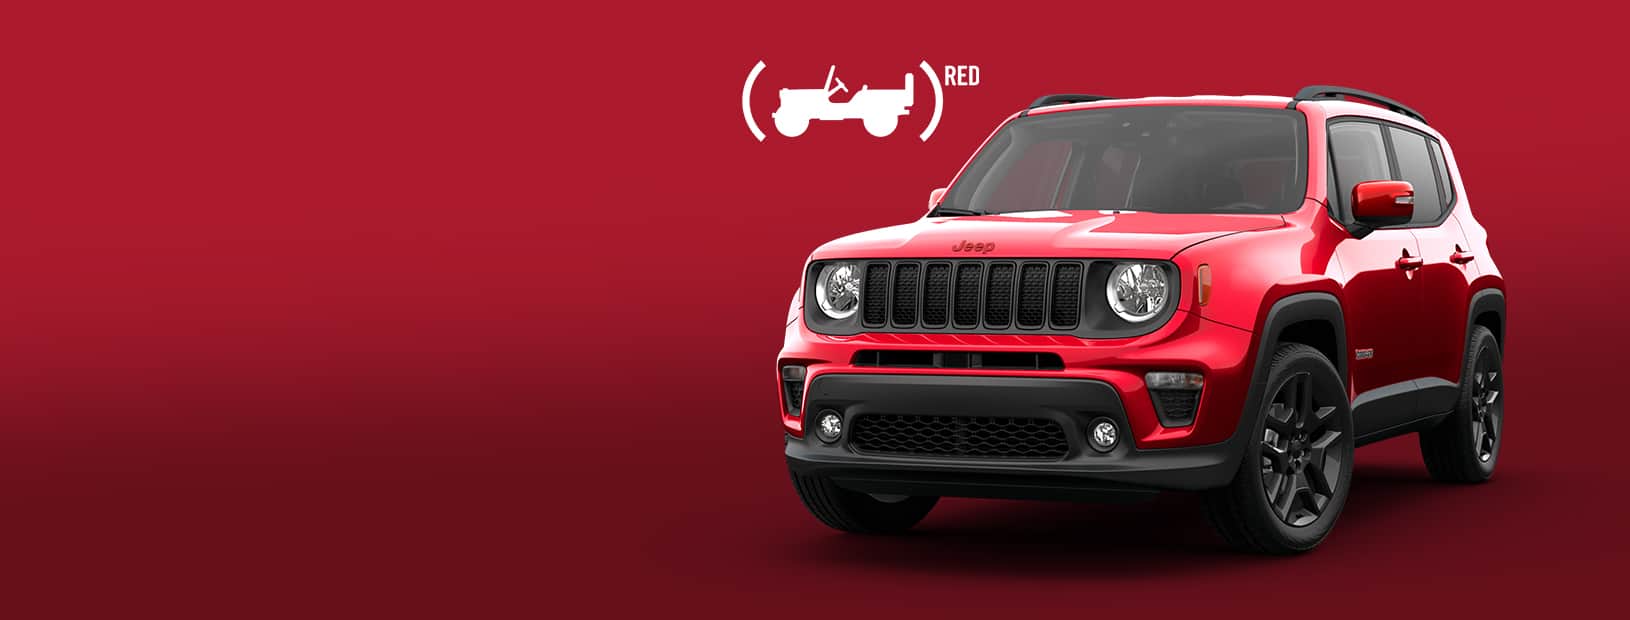 The Jeep Red Edition logo and a three-quarter front view of the 2022 Jeep Red Edition Renegade.